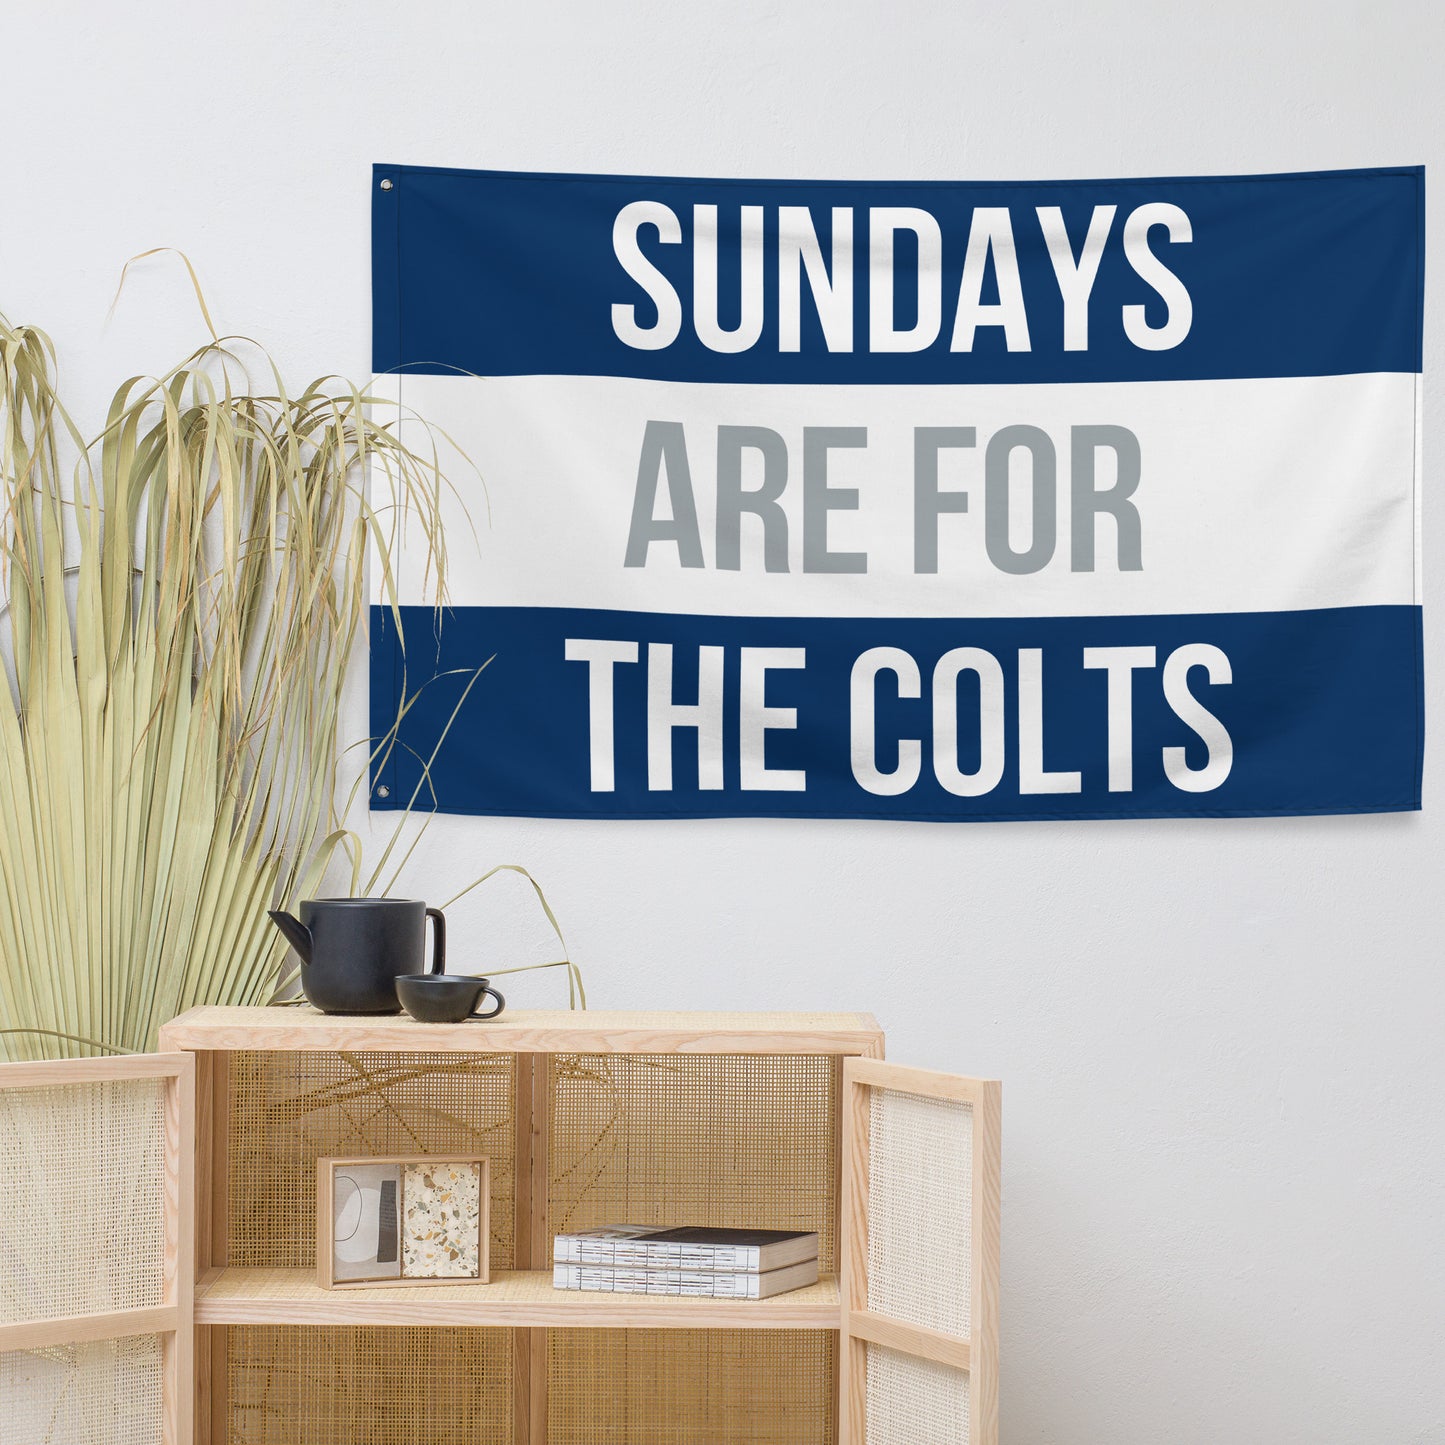 Sundays are for the Colts Flag, Indianapolis Colts Flag, Football Tailgate Flag